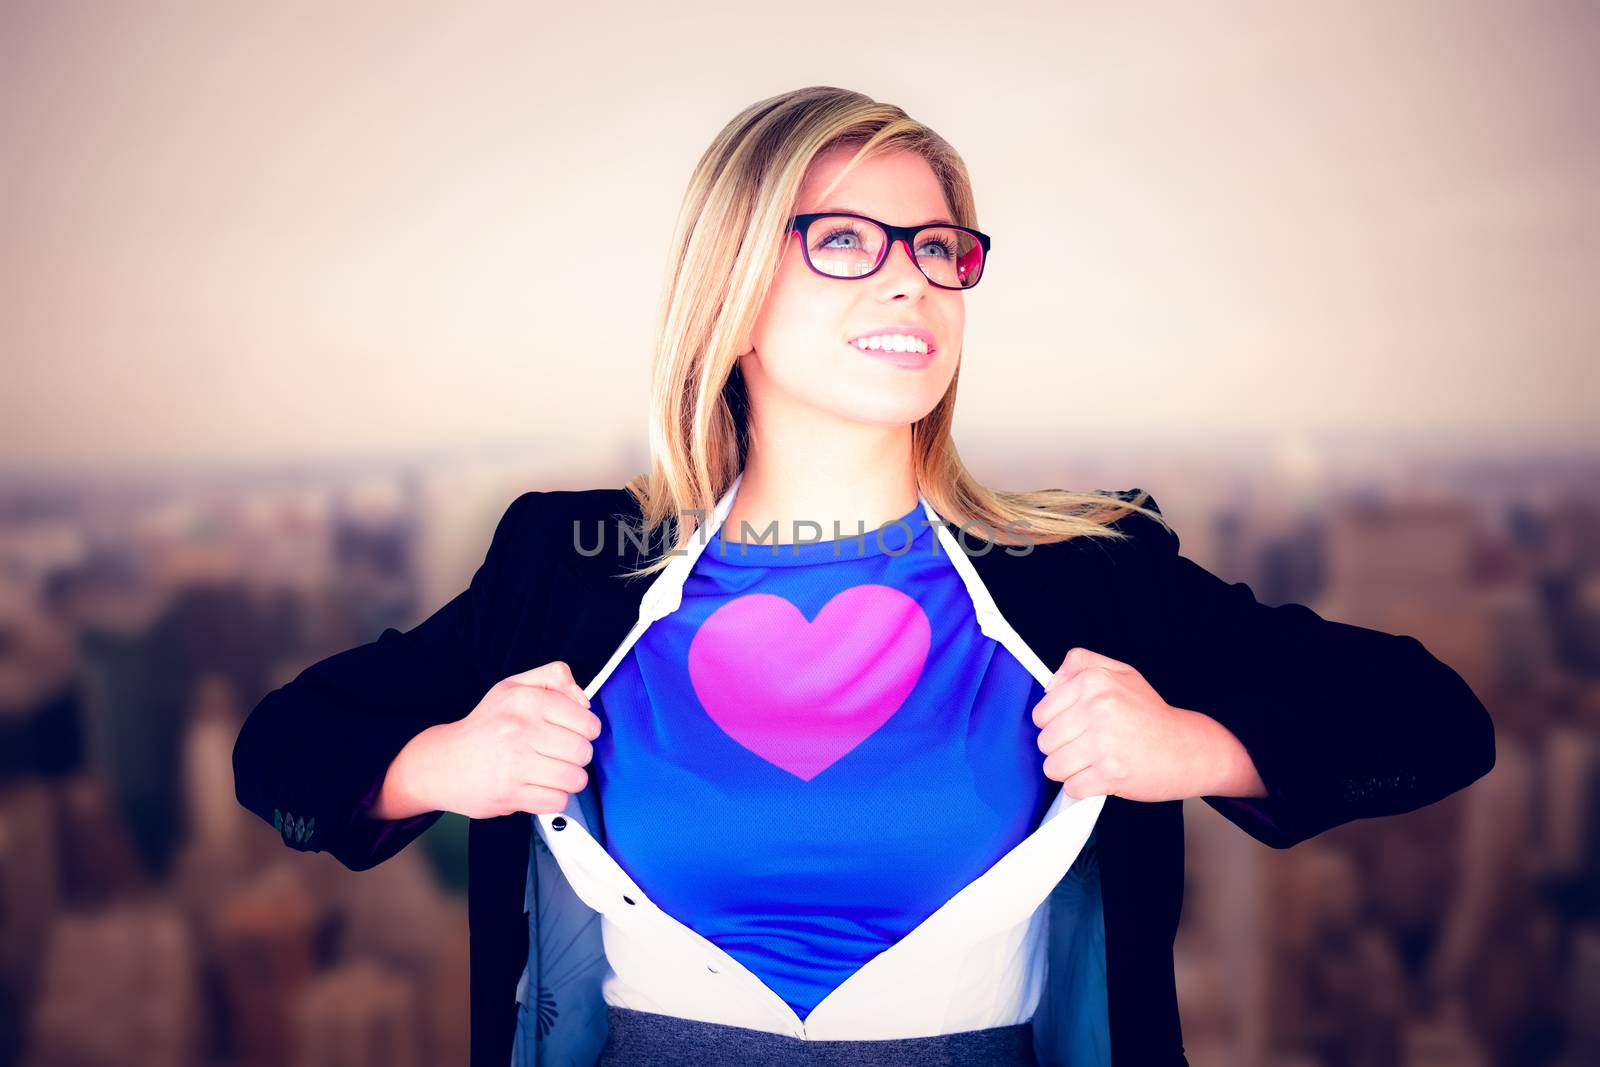 Composite image of businesswoman opening her shirt superhero style by Wavebreakmedia